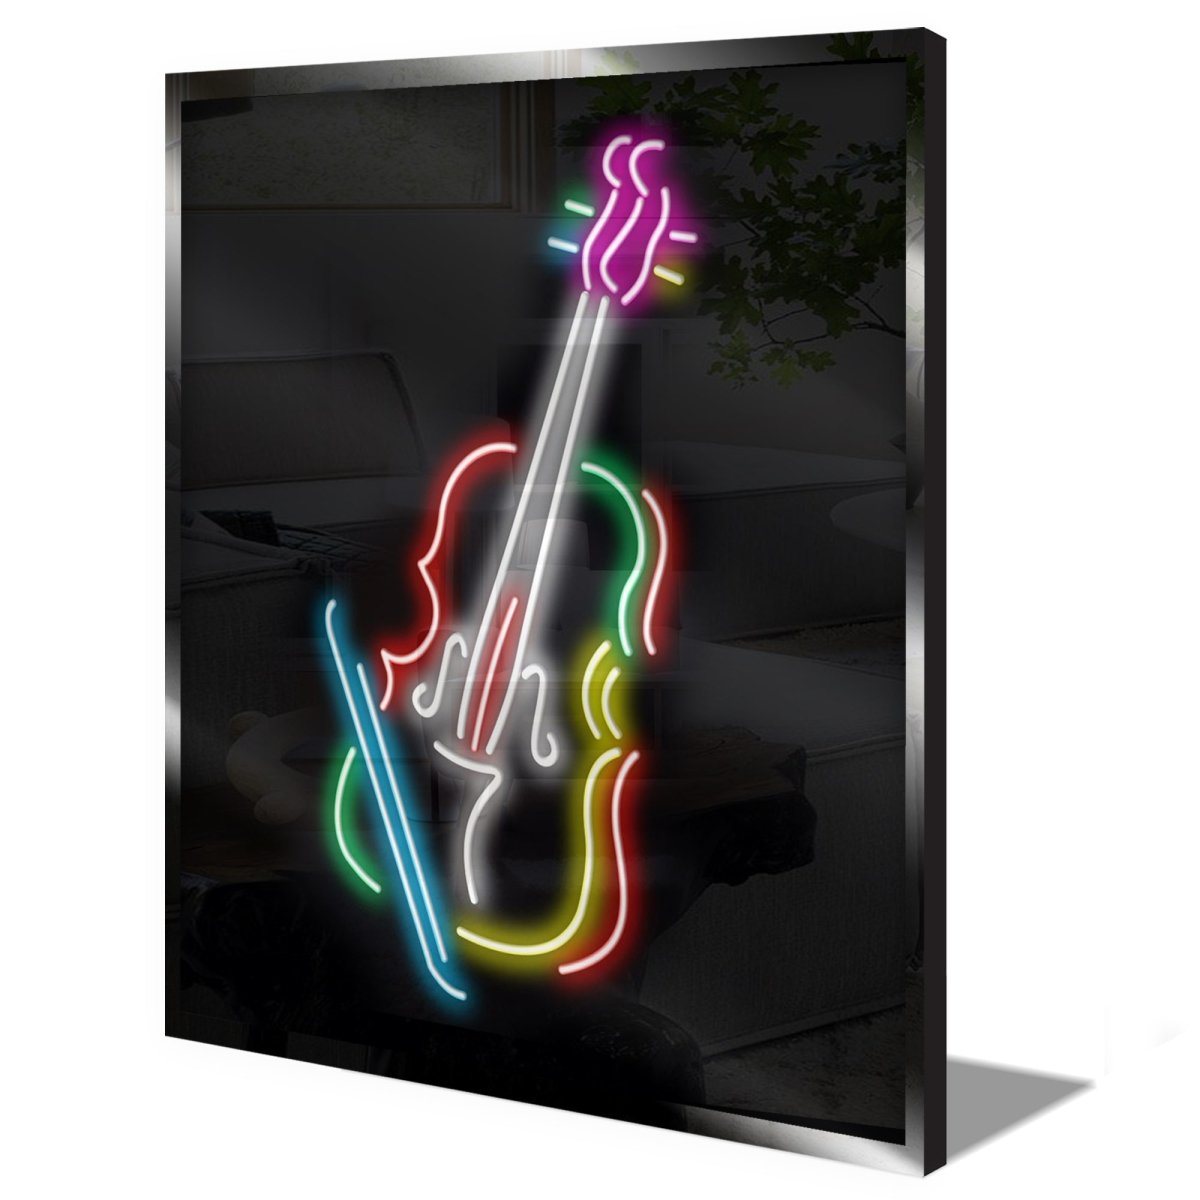 Personalised LED Neon Sign STRINGS - madaboutneon